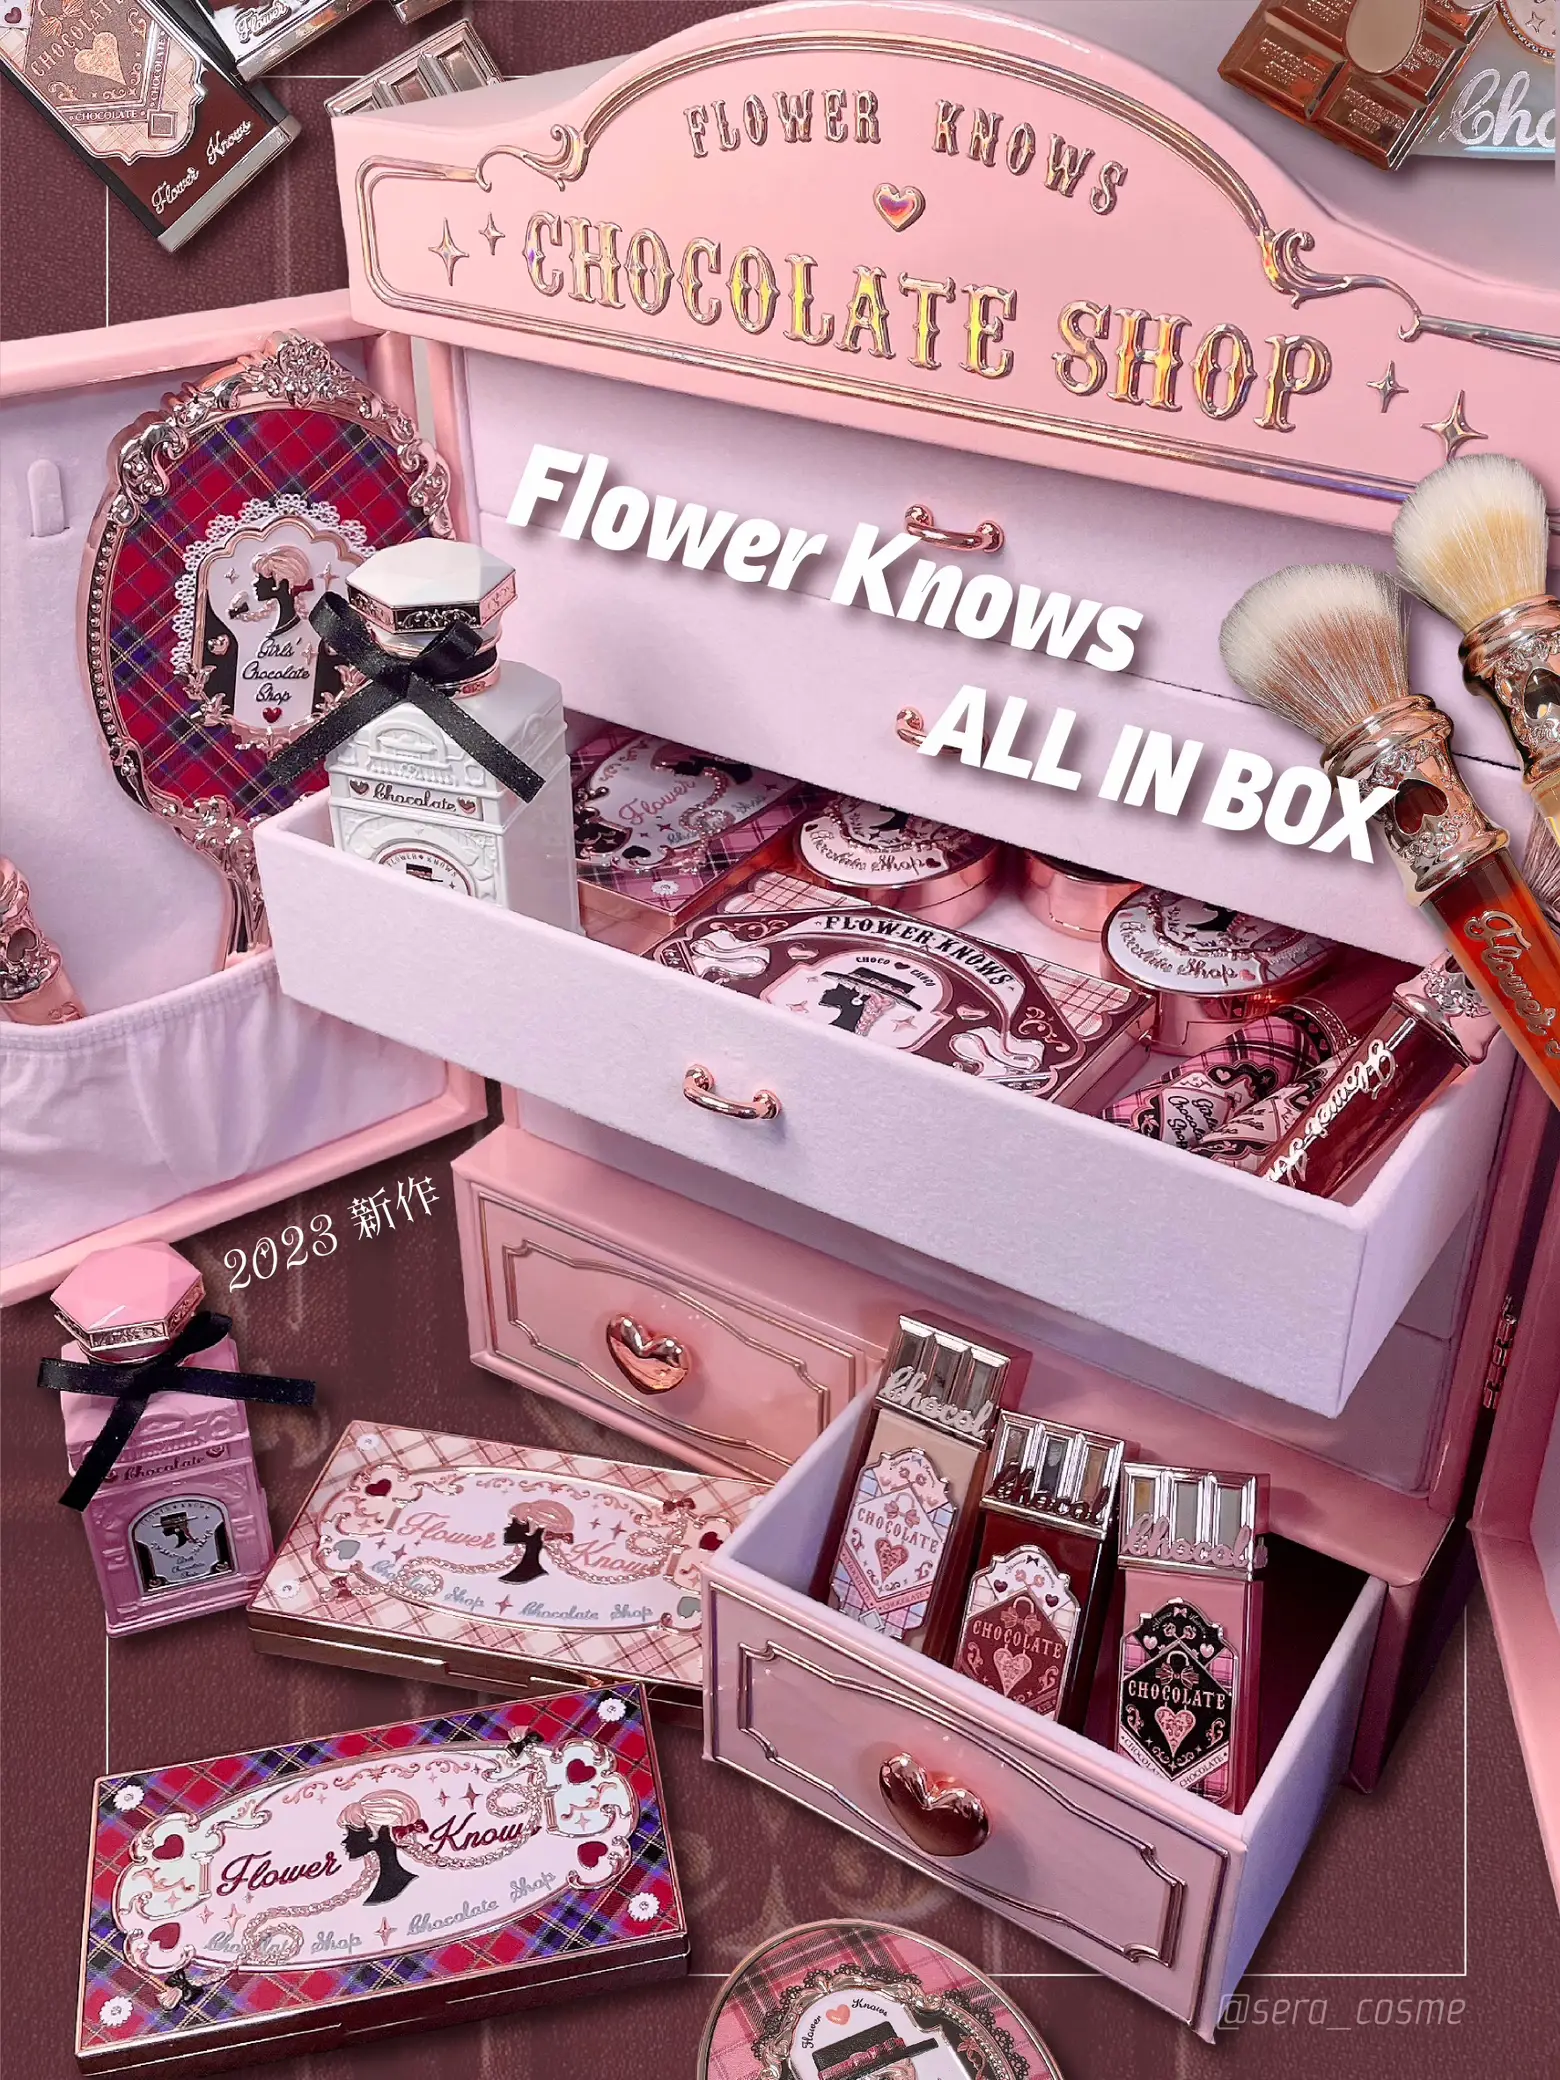 Flower Knows】新作🍫チョコレートシリーズ ALL IN BOX🍫 | セラ